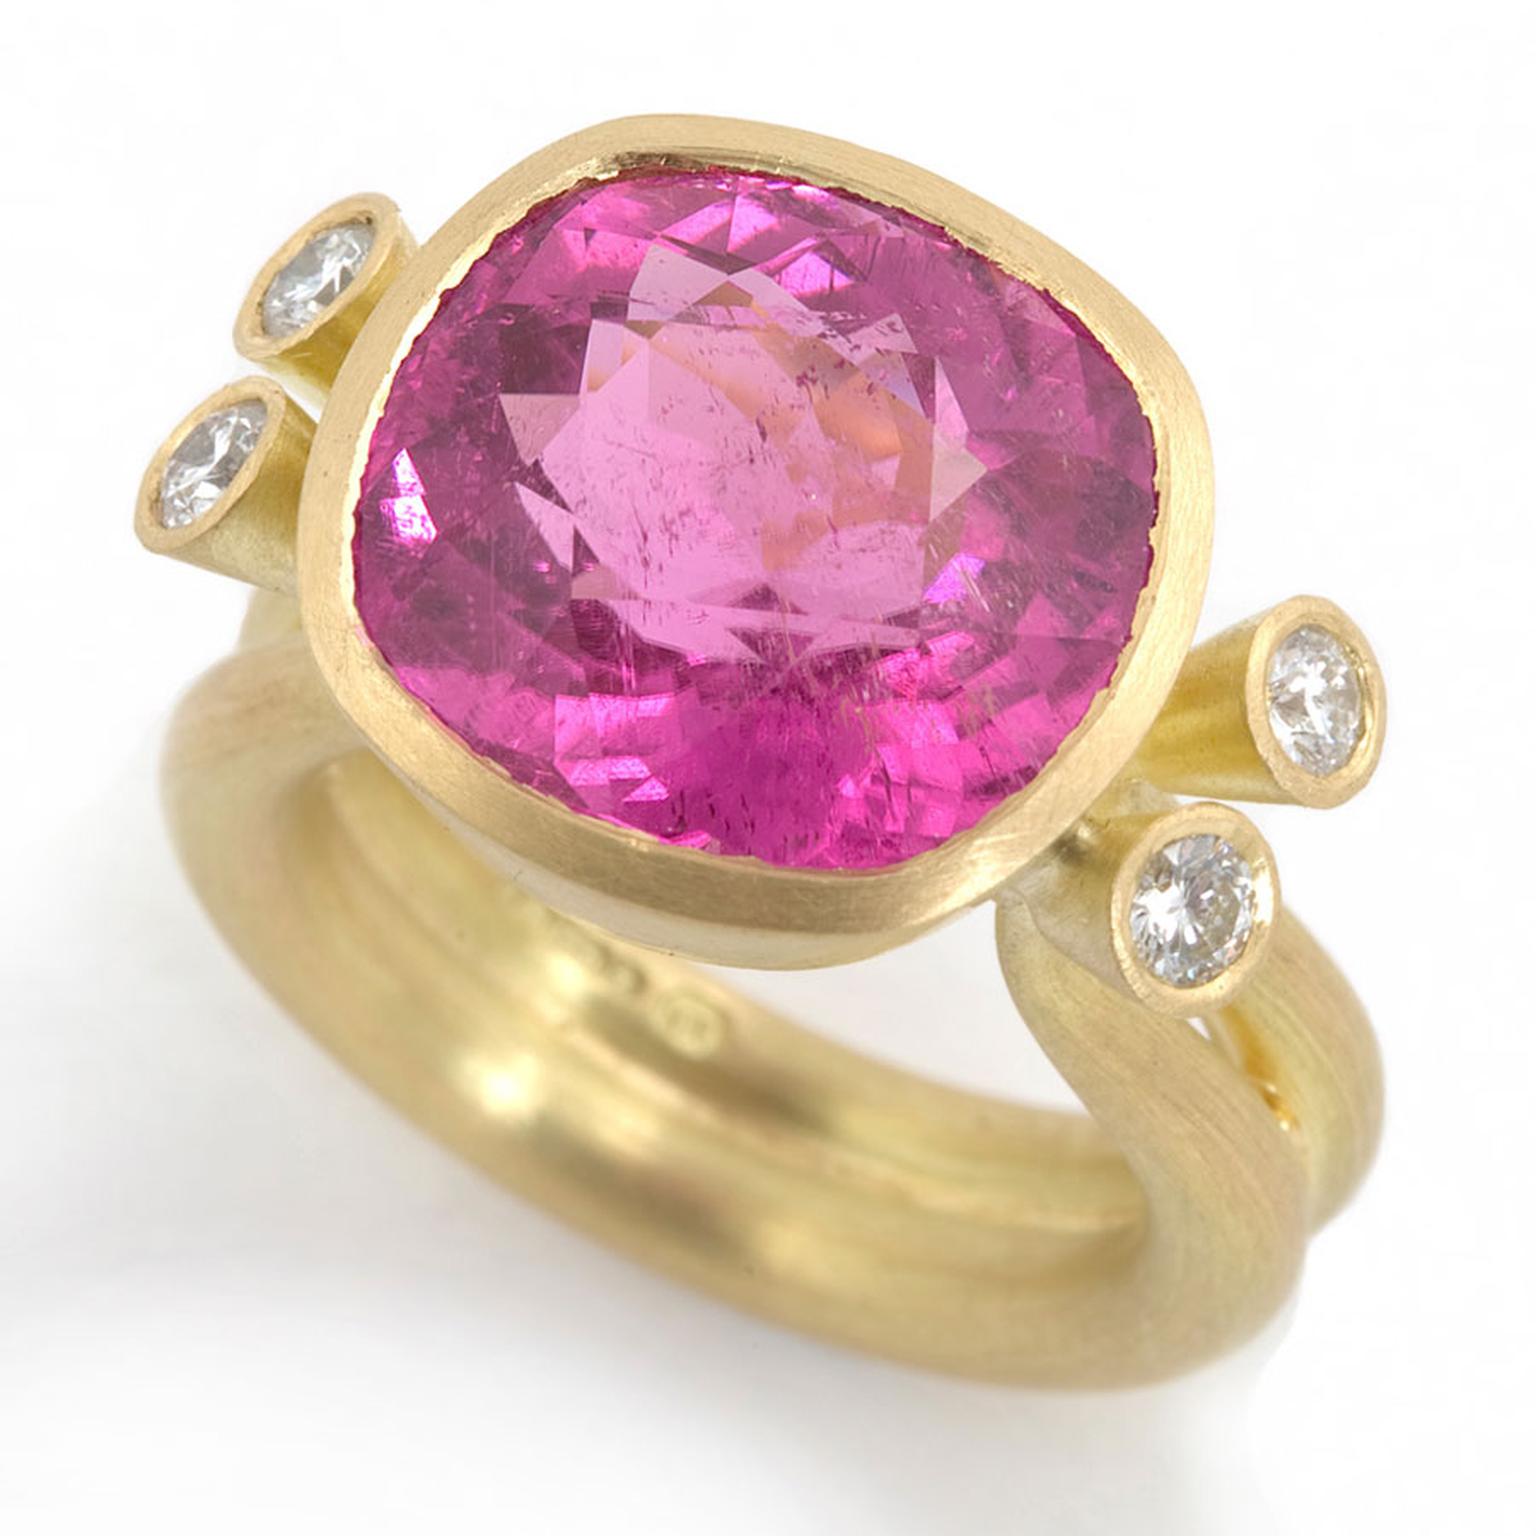 Kath Libbert. Mark-Nuell_Ring-with-pink-tourmaline-and-diamonds